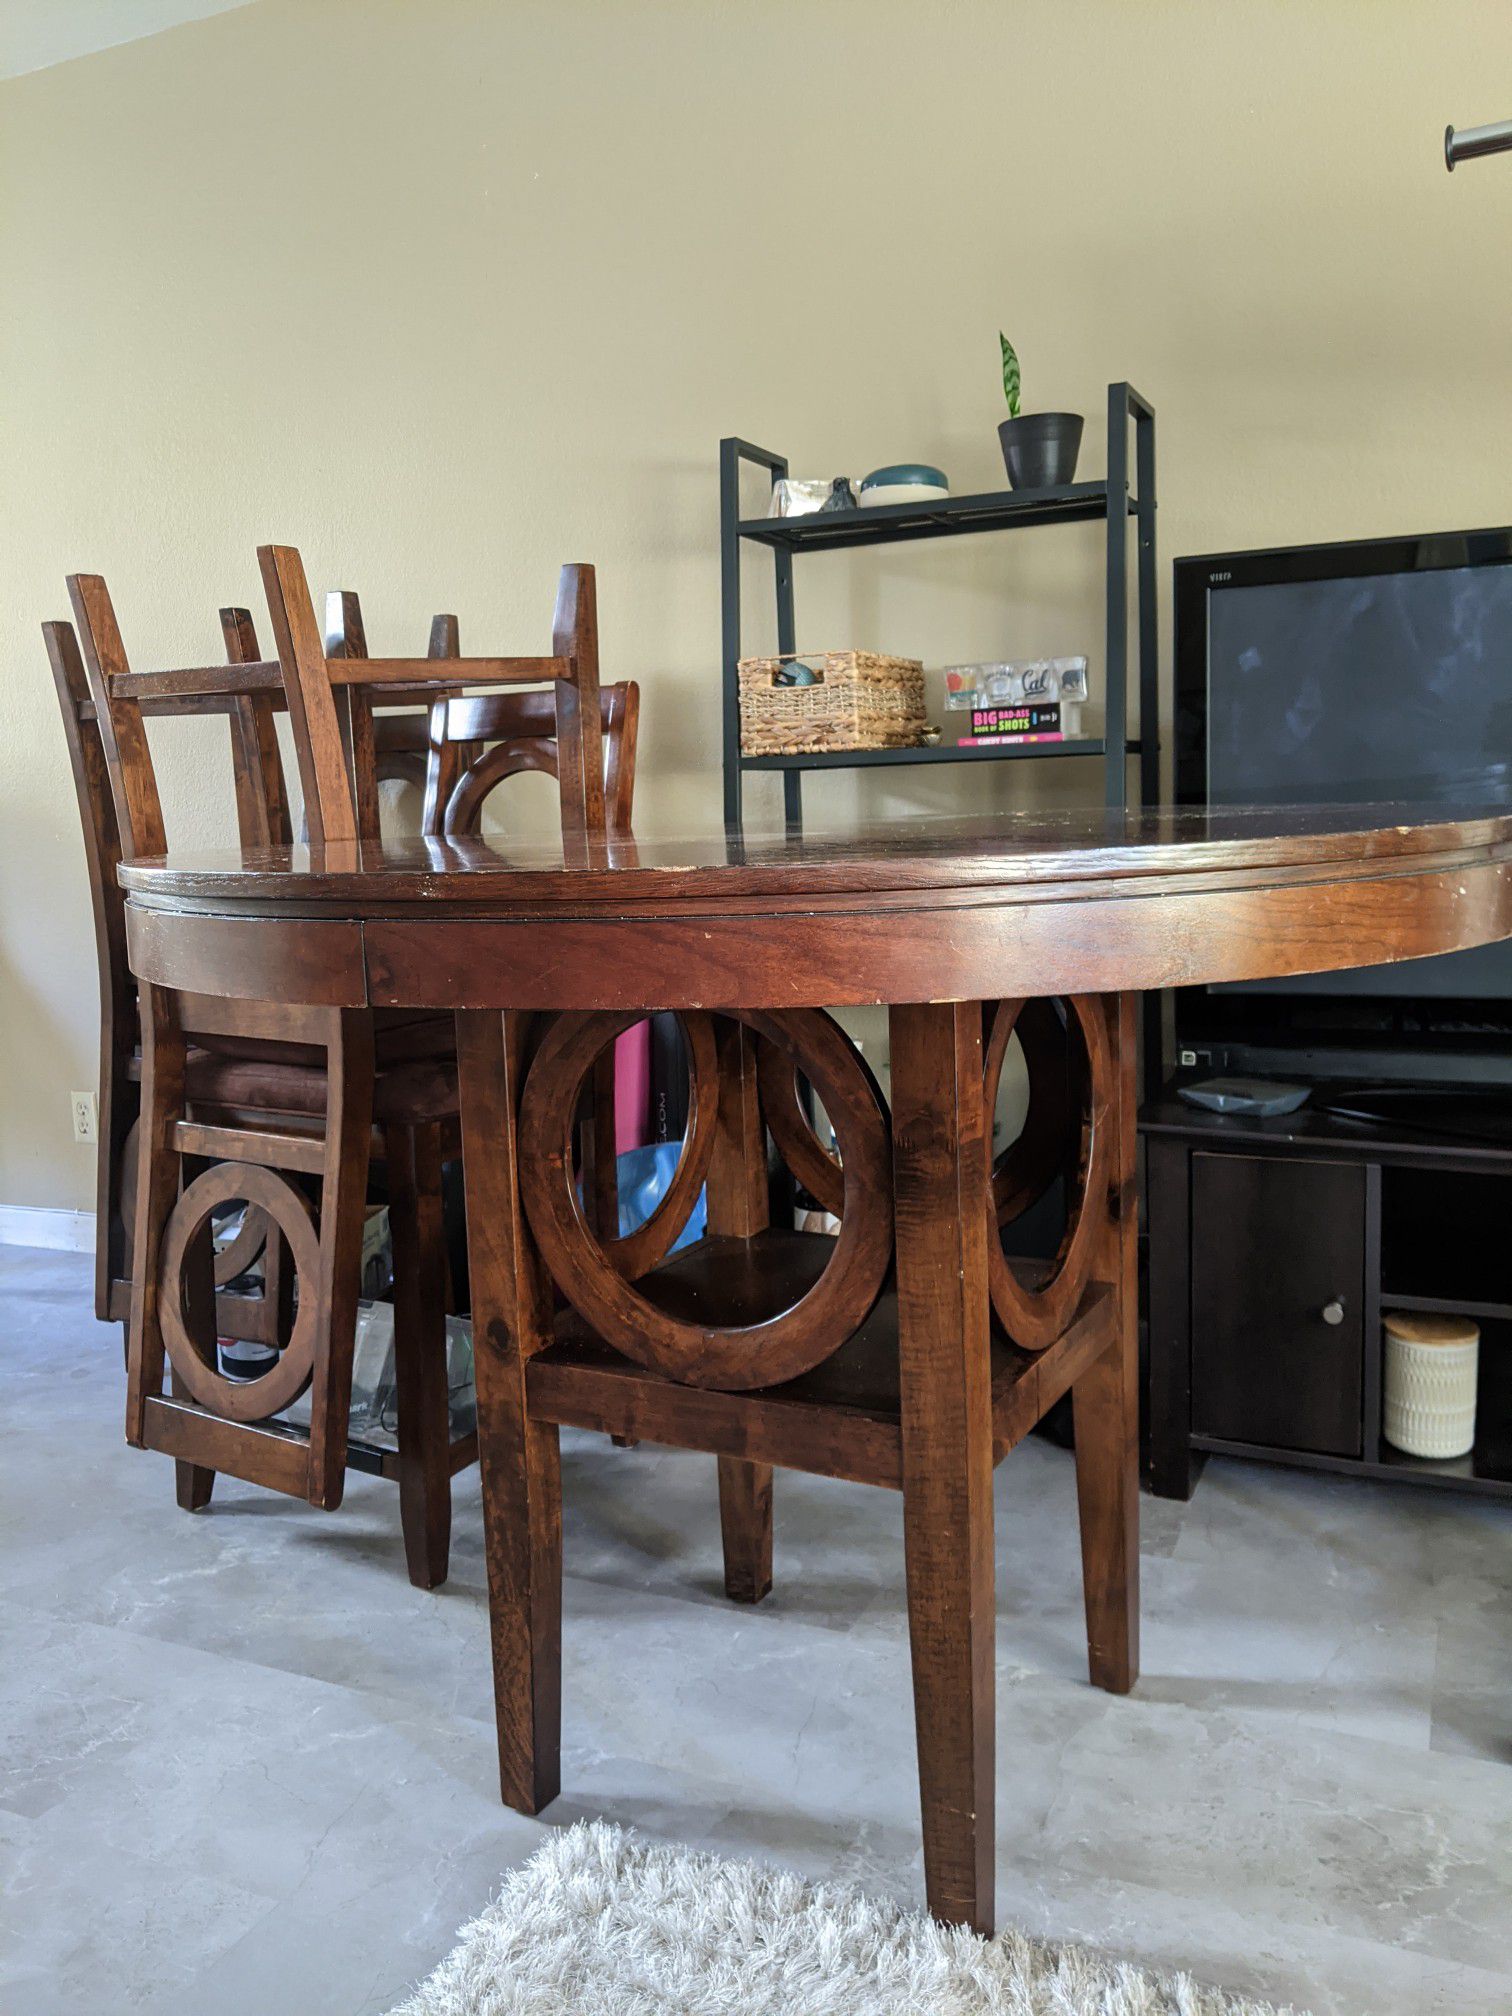 Full Wooden Dining Table Set (48" table + 4 chairs)